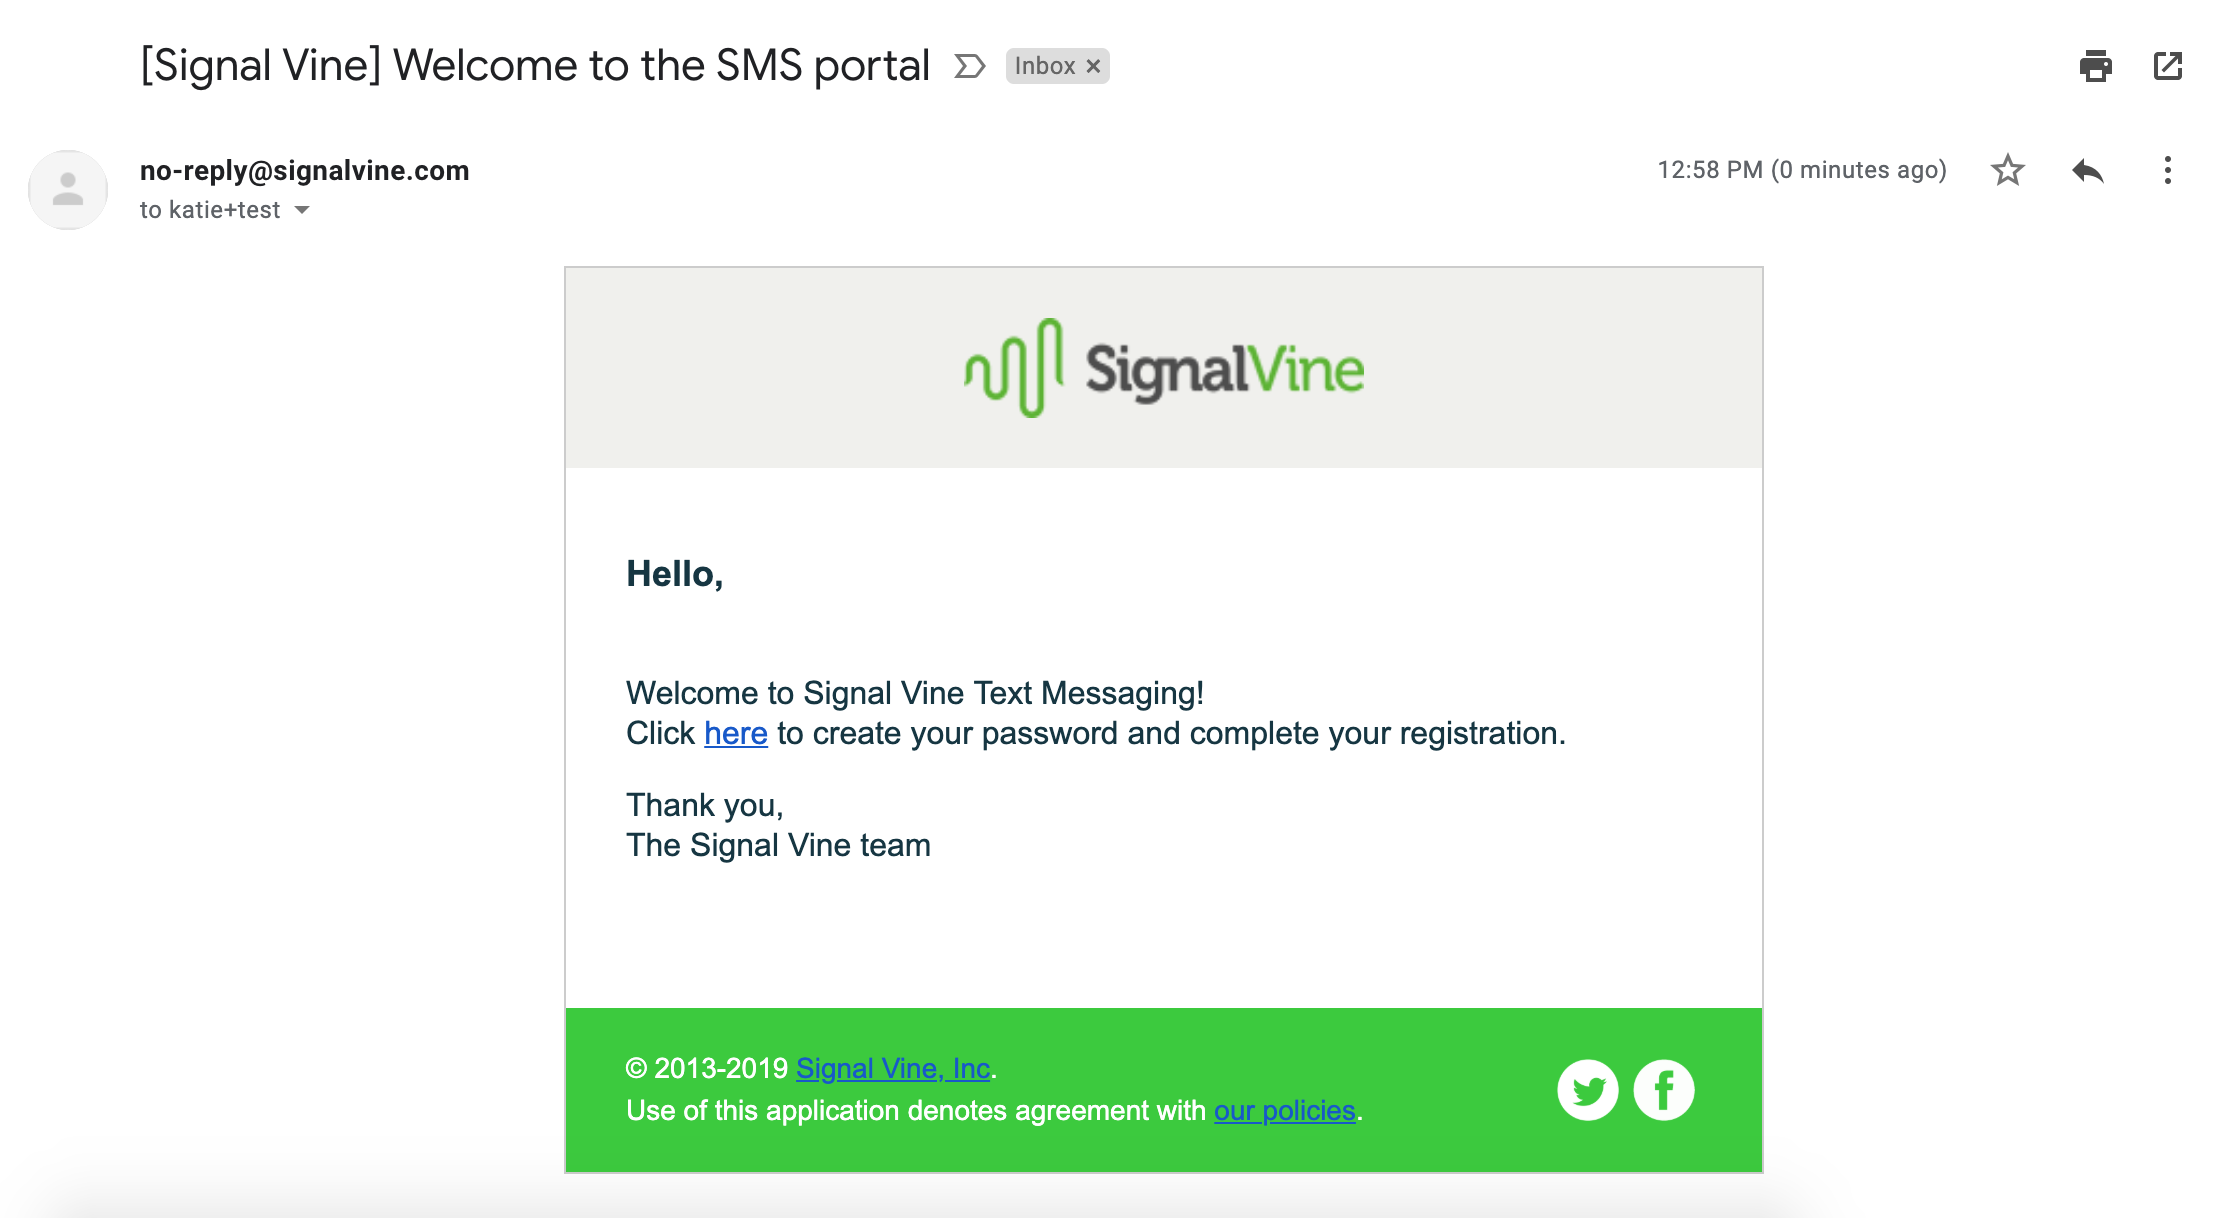 Image of Signal Vine welcome email